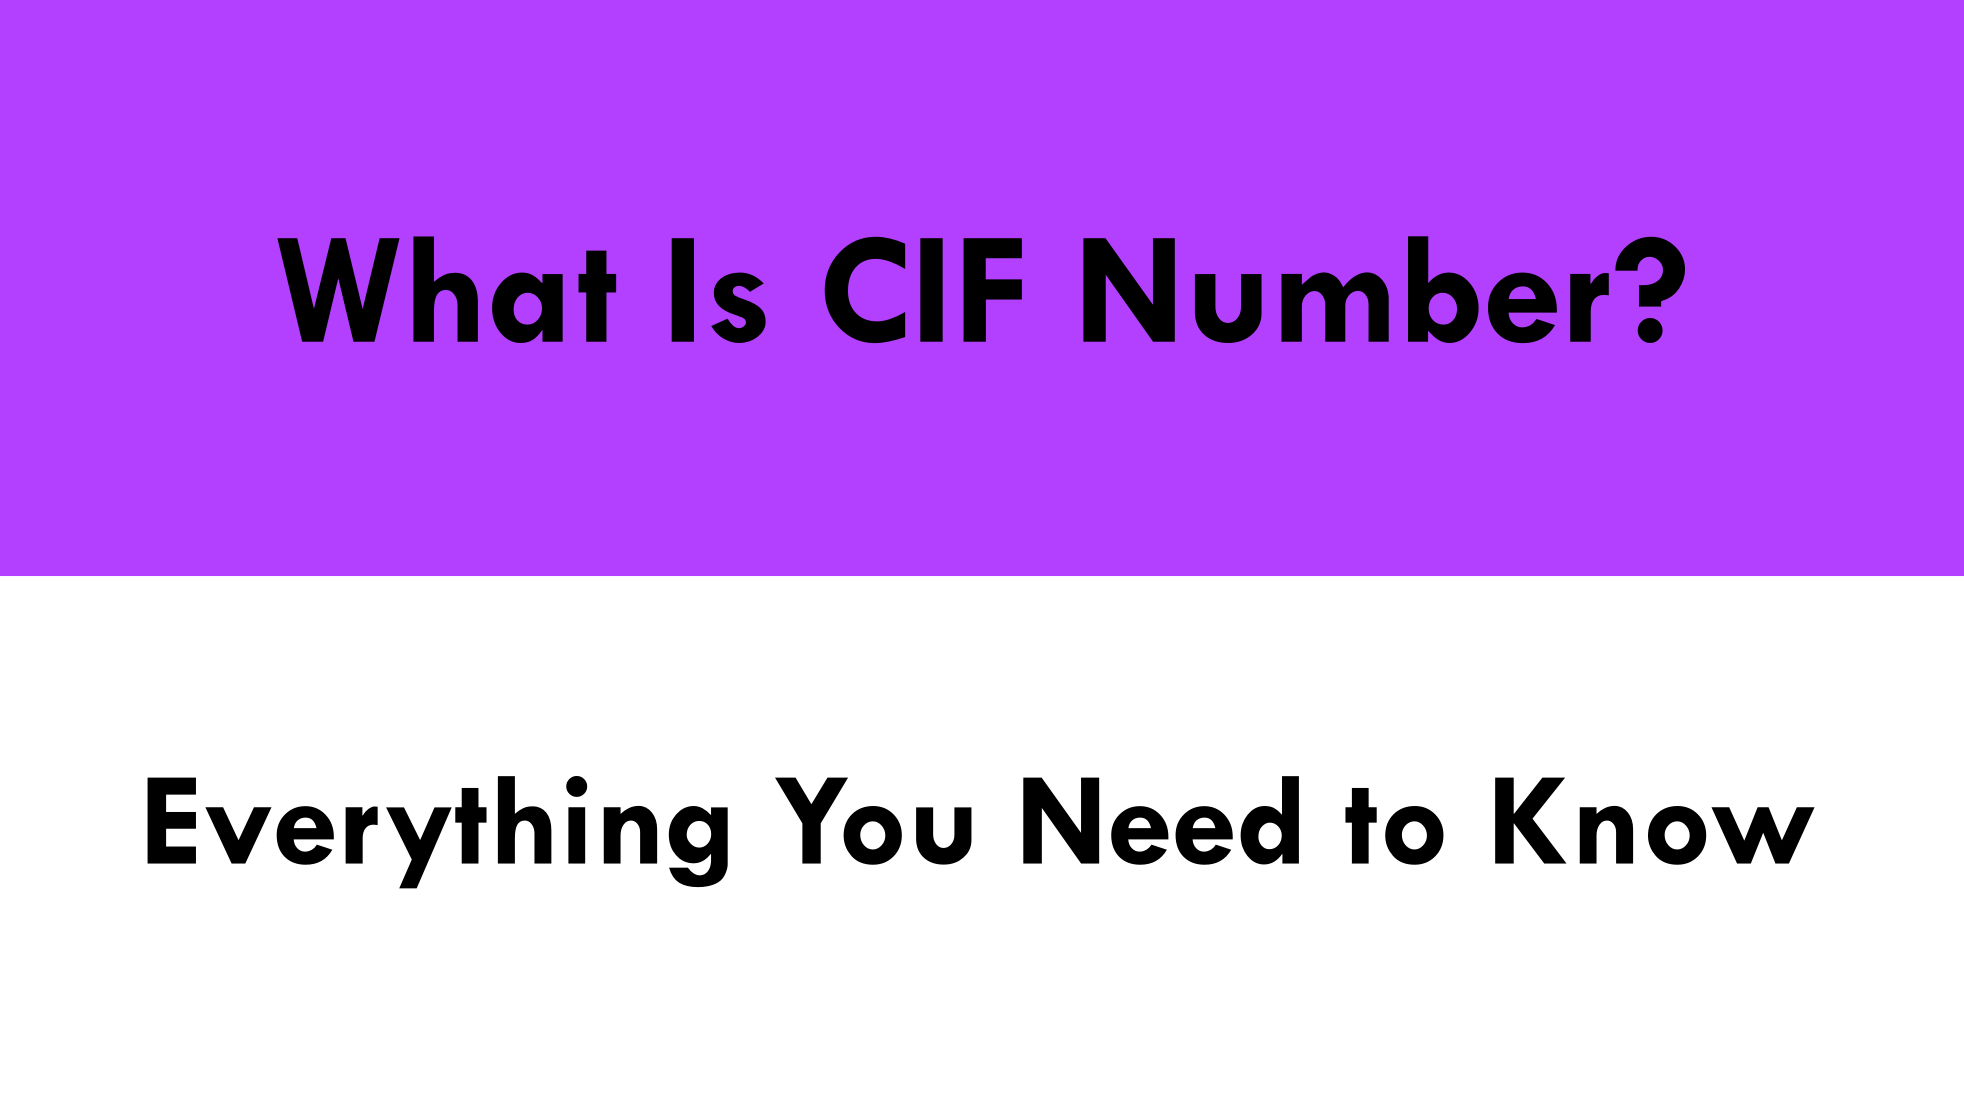 What Is CIF Number